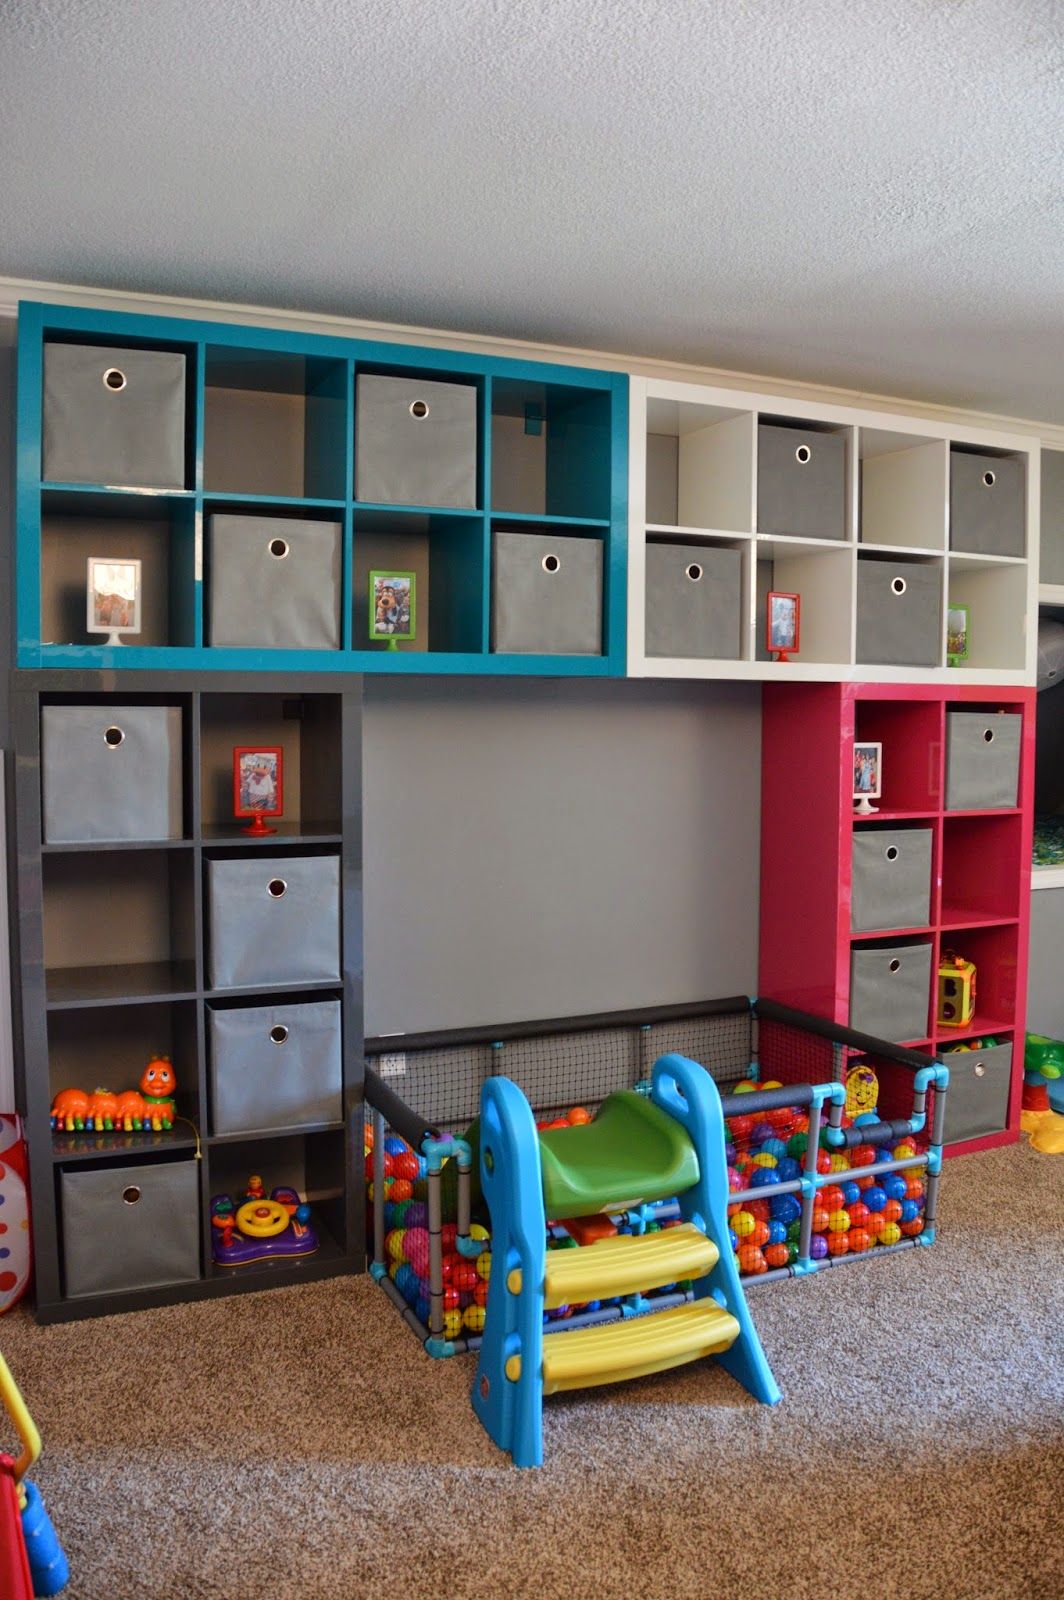 Toy storage ideas living room for small spaces. Learn how to organize toys  in a small space, living room toy storage furniture, and DIY toy storage  ideas.